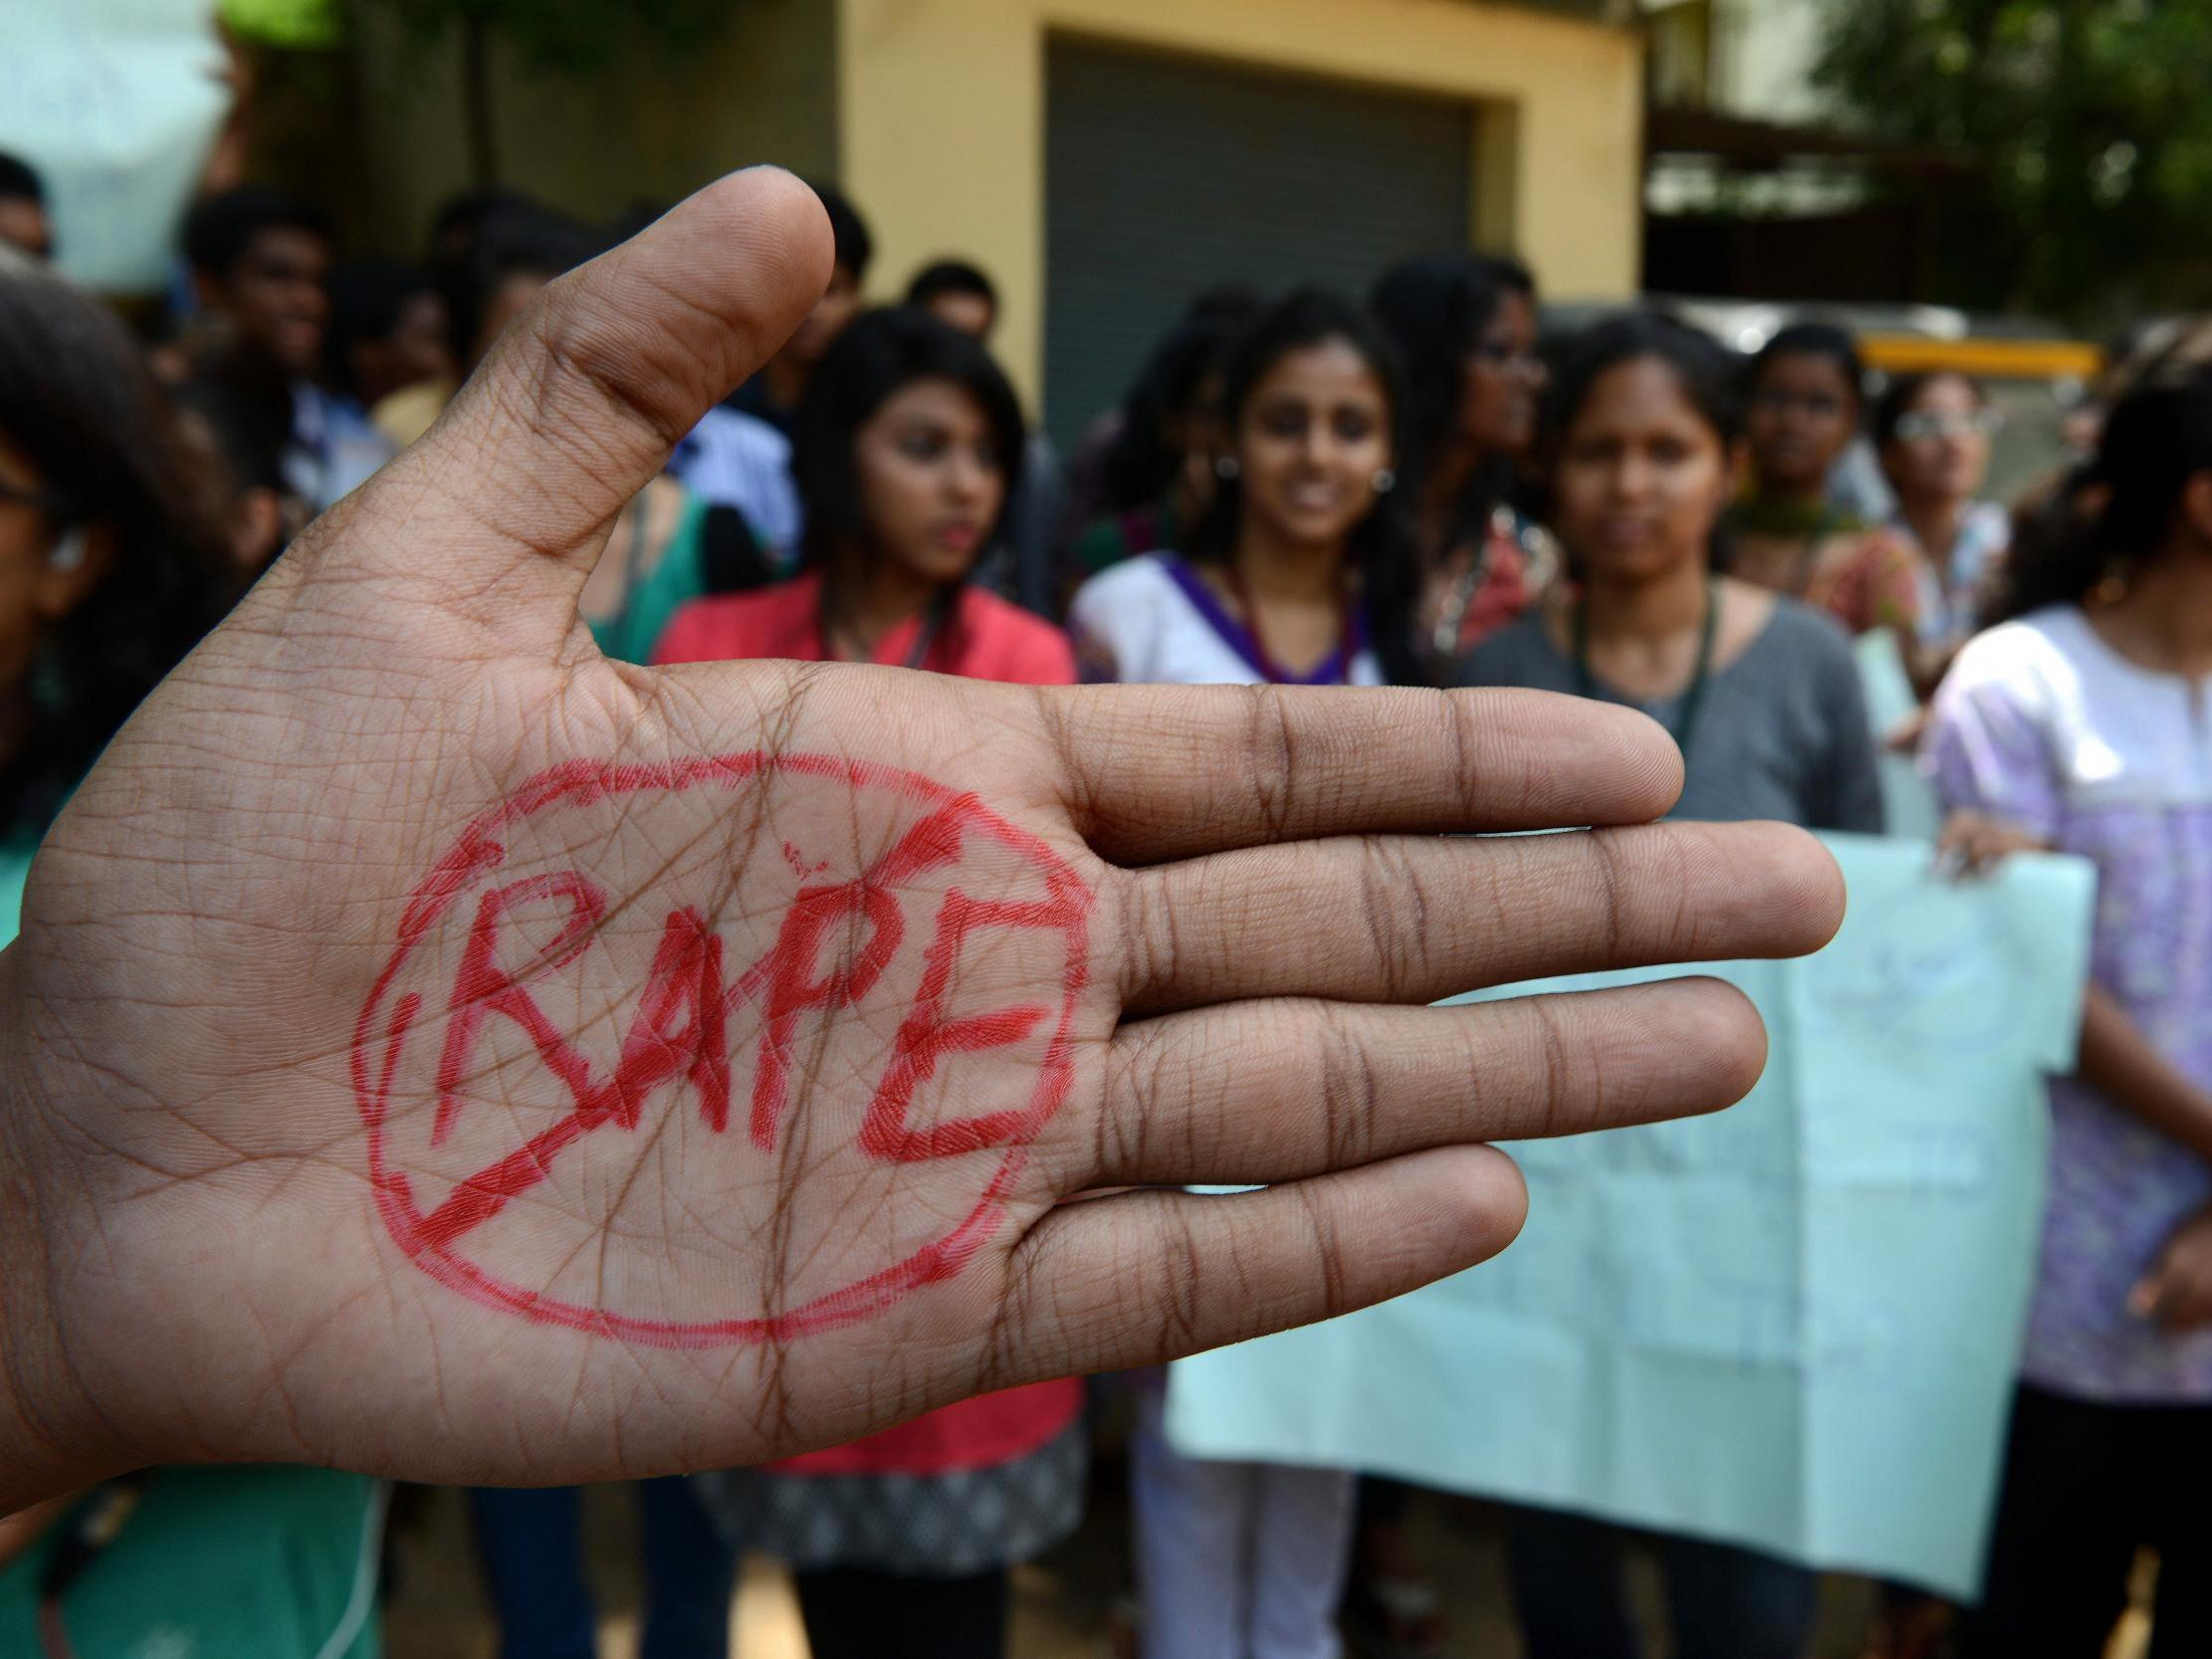 India registered nearly 40,000 rapes in 2016, or an average of around 100 cases every day